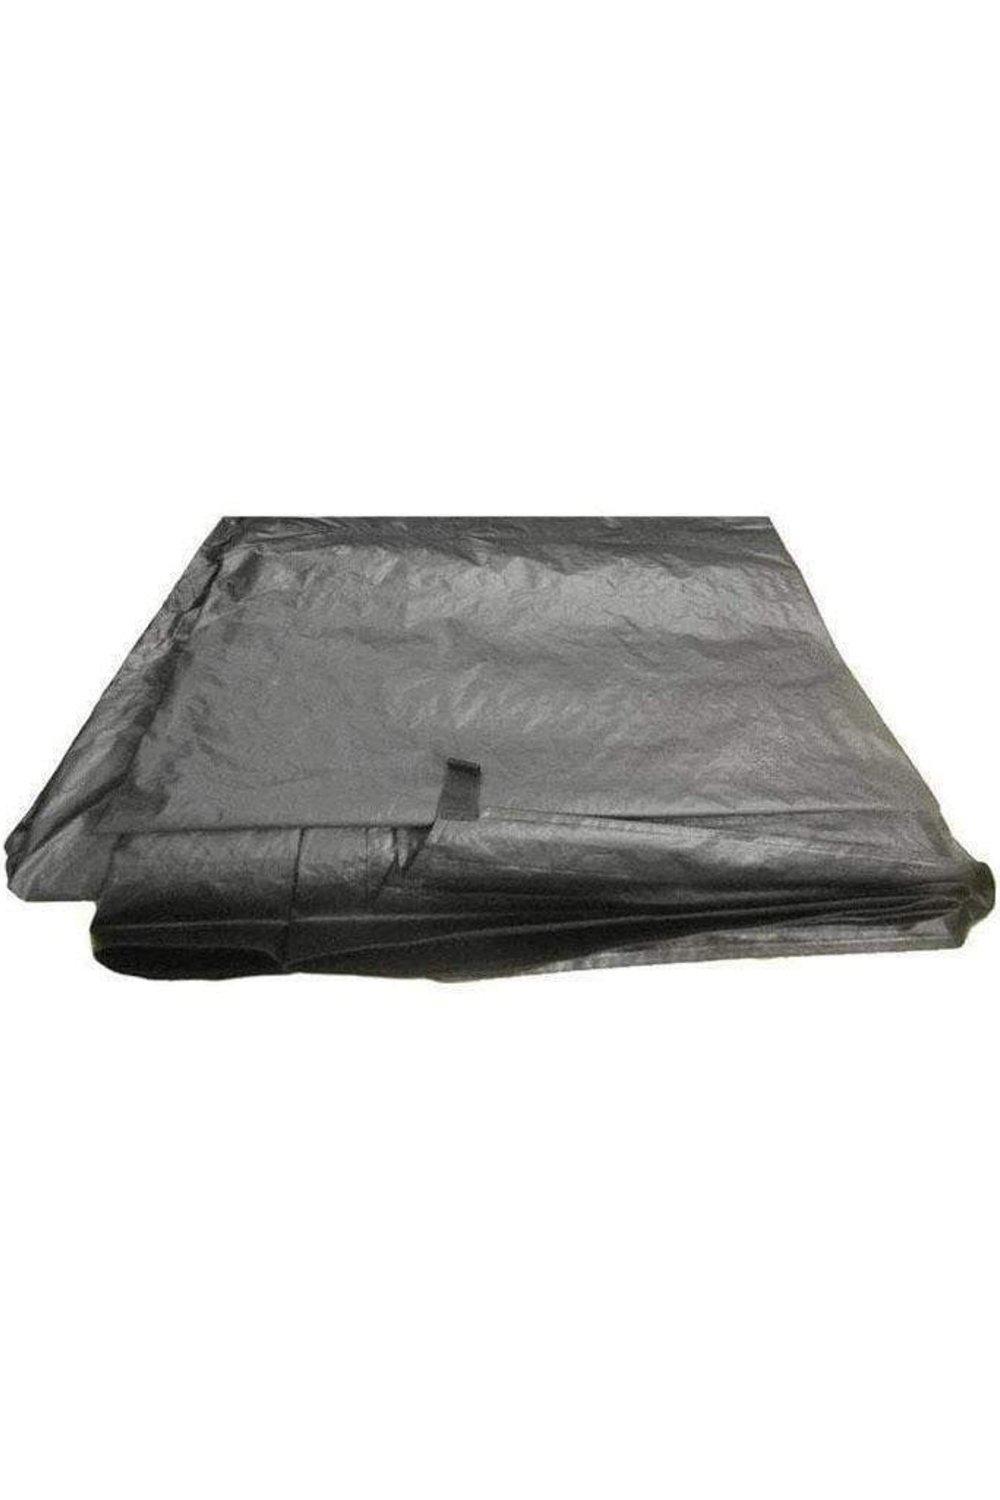 Cocoon / California Breeze - Footprint Groundsheet (with Pegs)